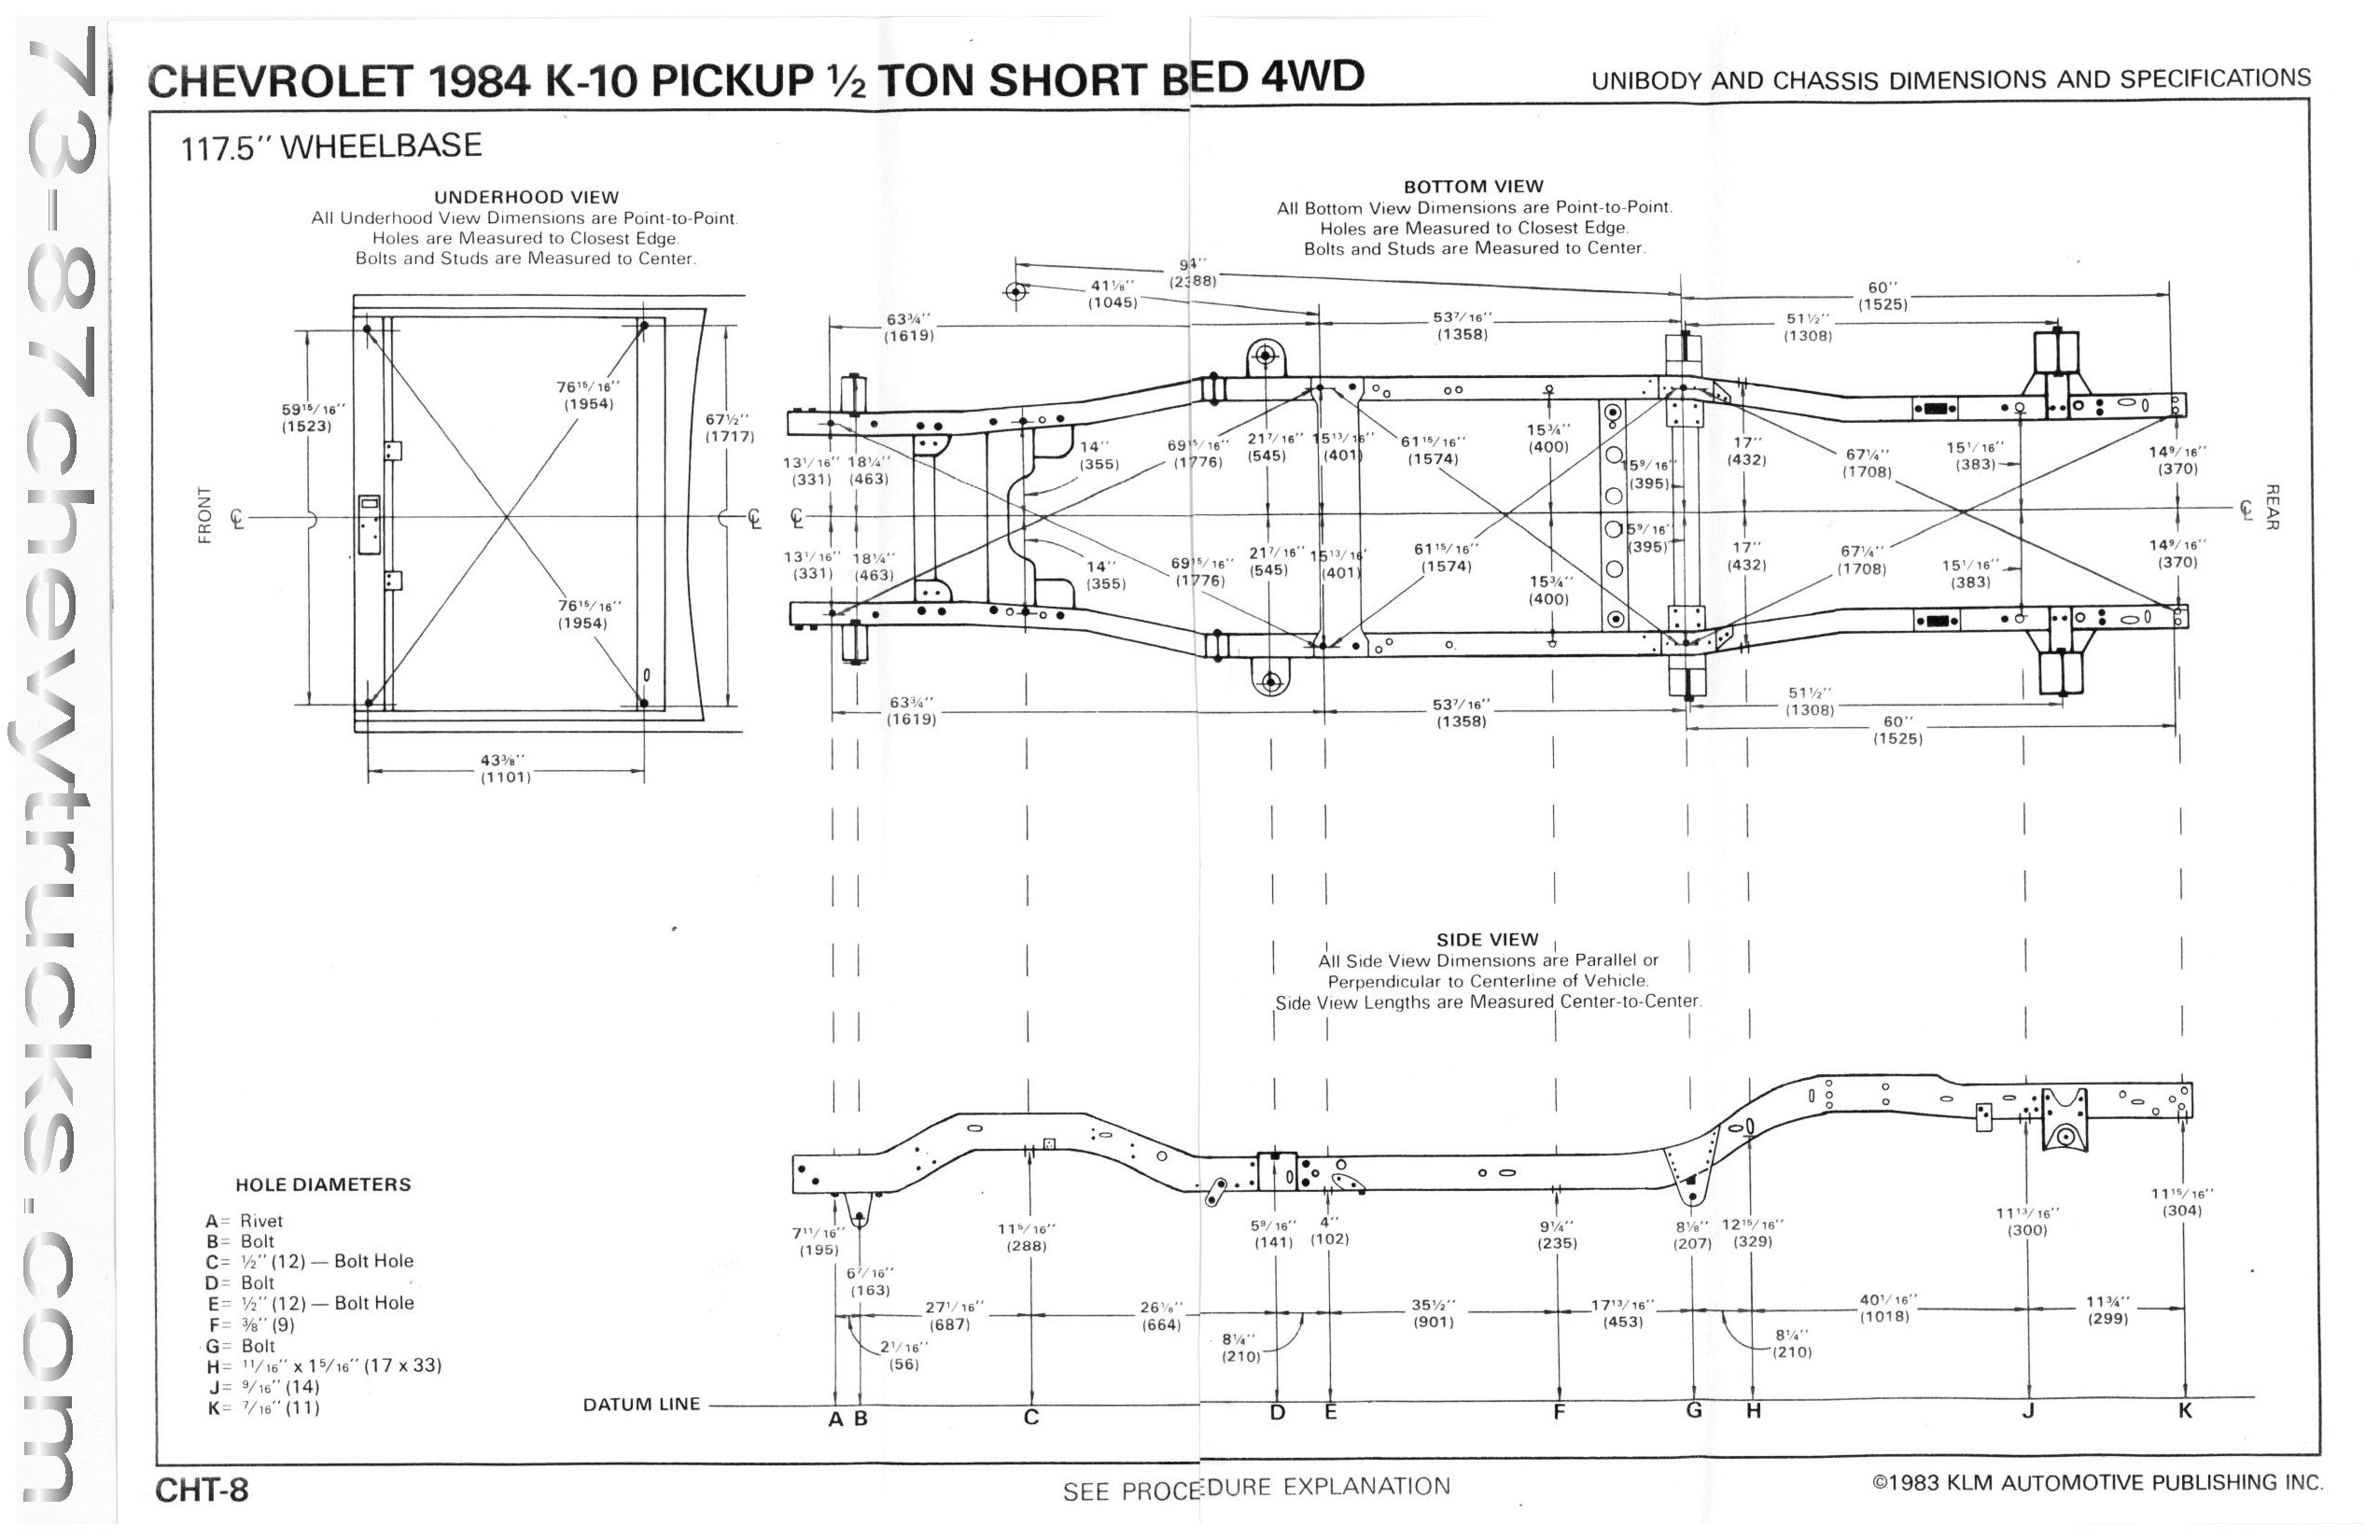 1985 Chevy S10 Frame Dimensions Infoupdate Org